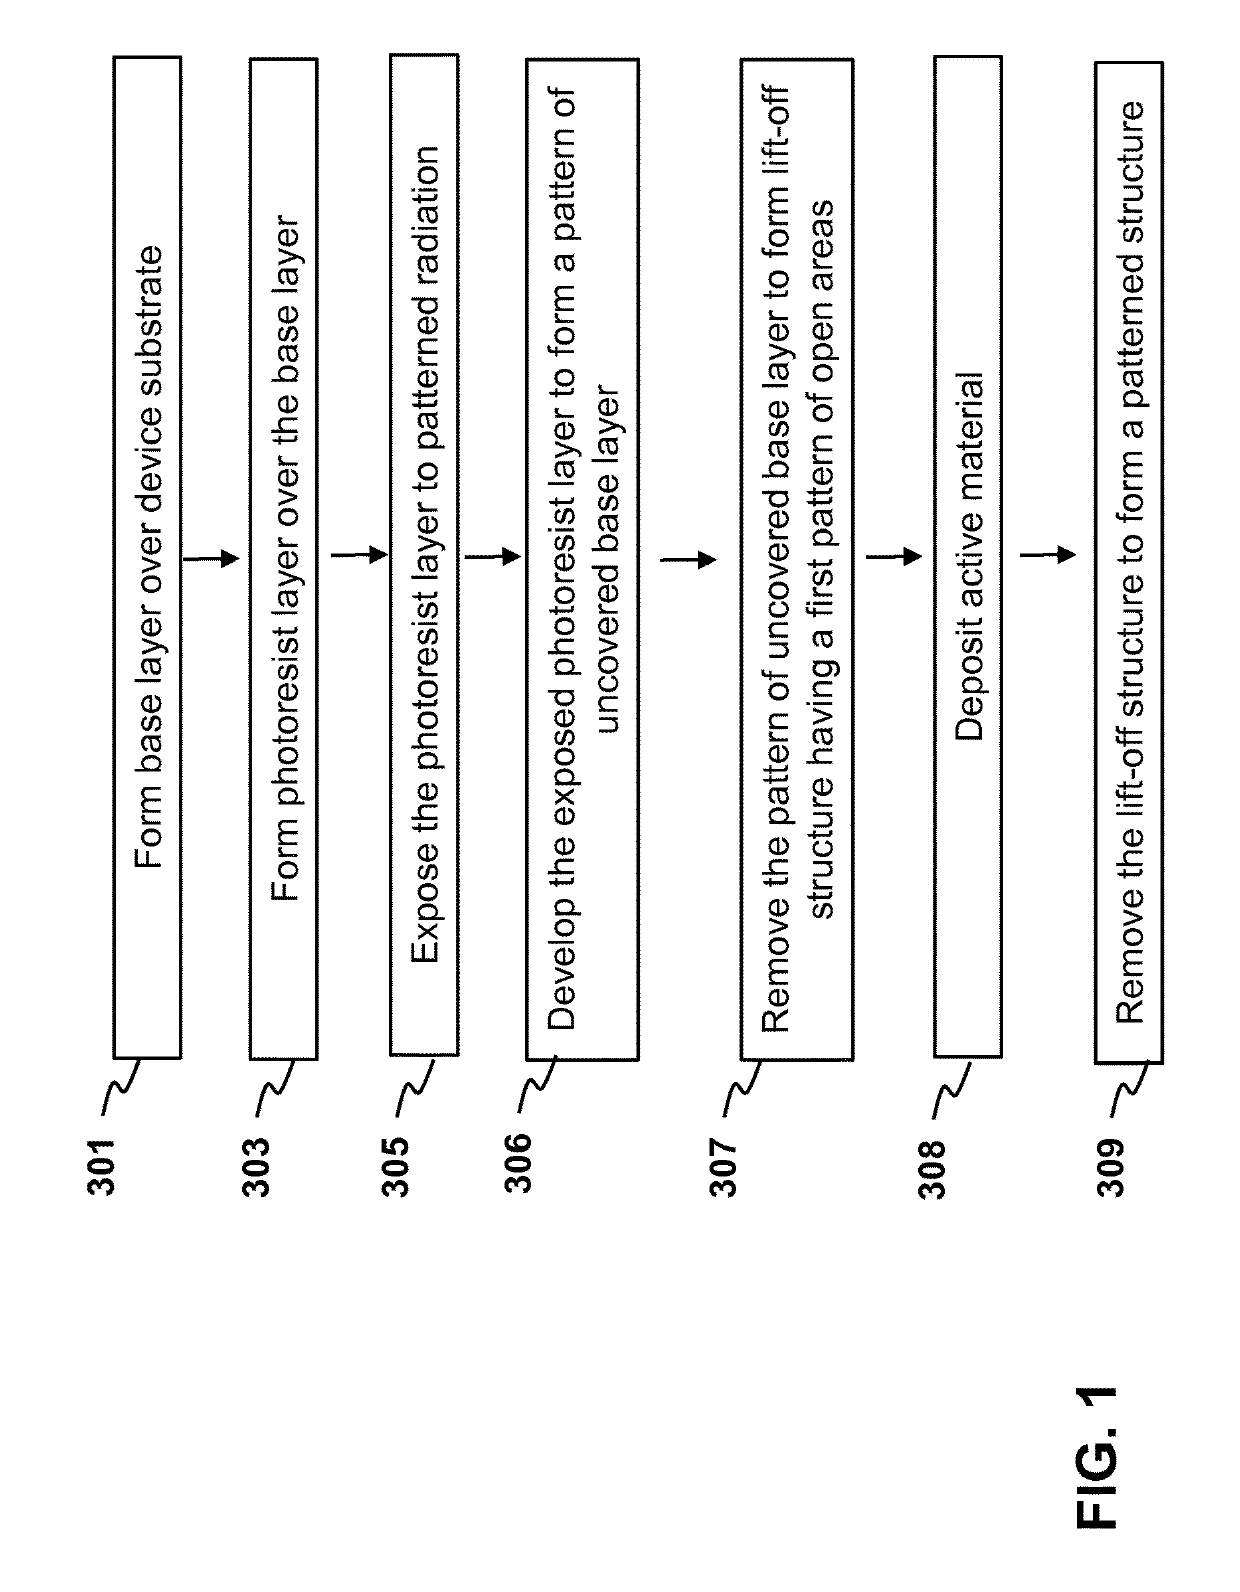 Photolithographic patterning of devices